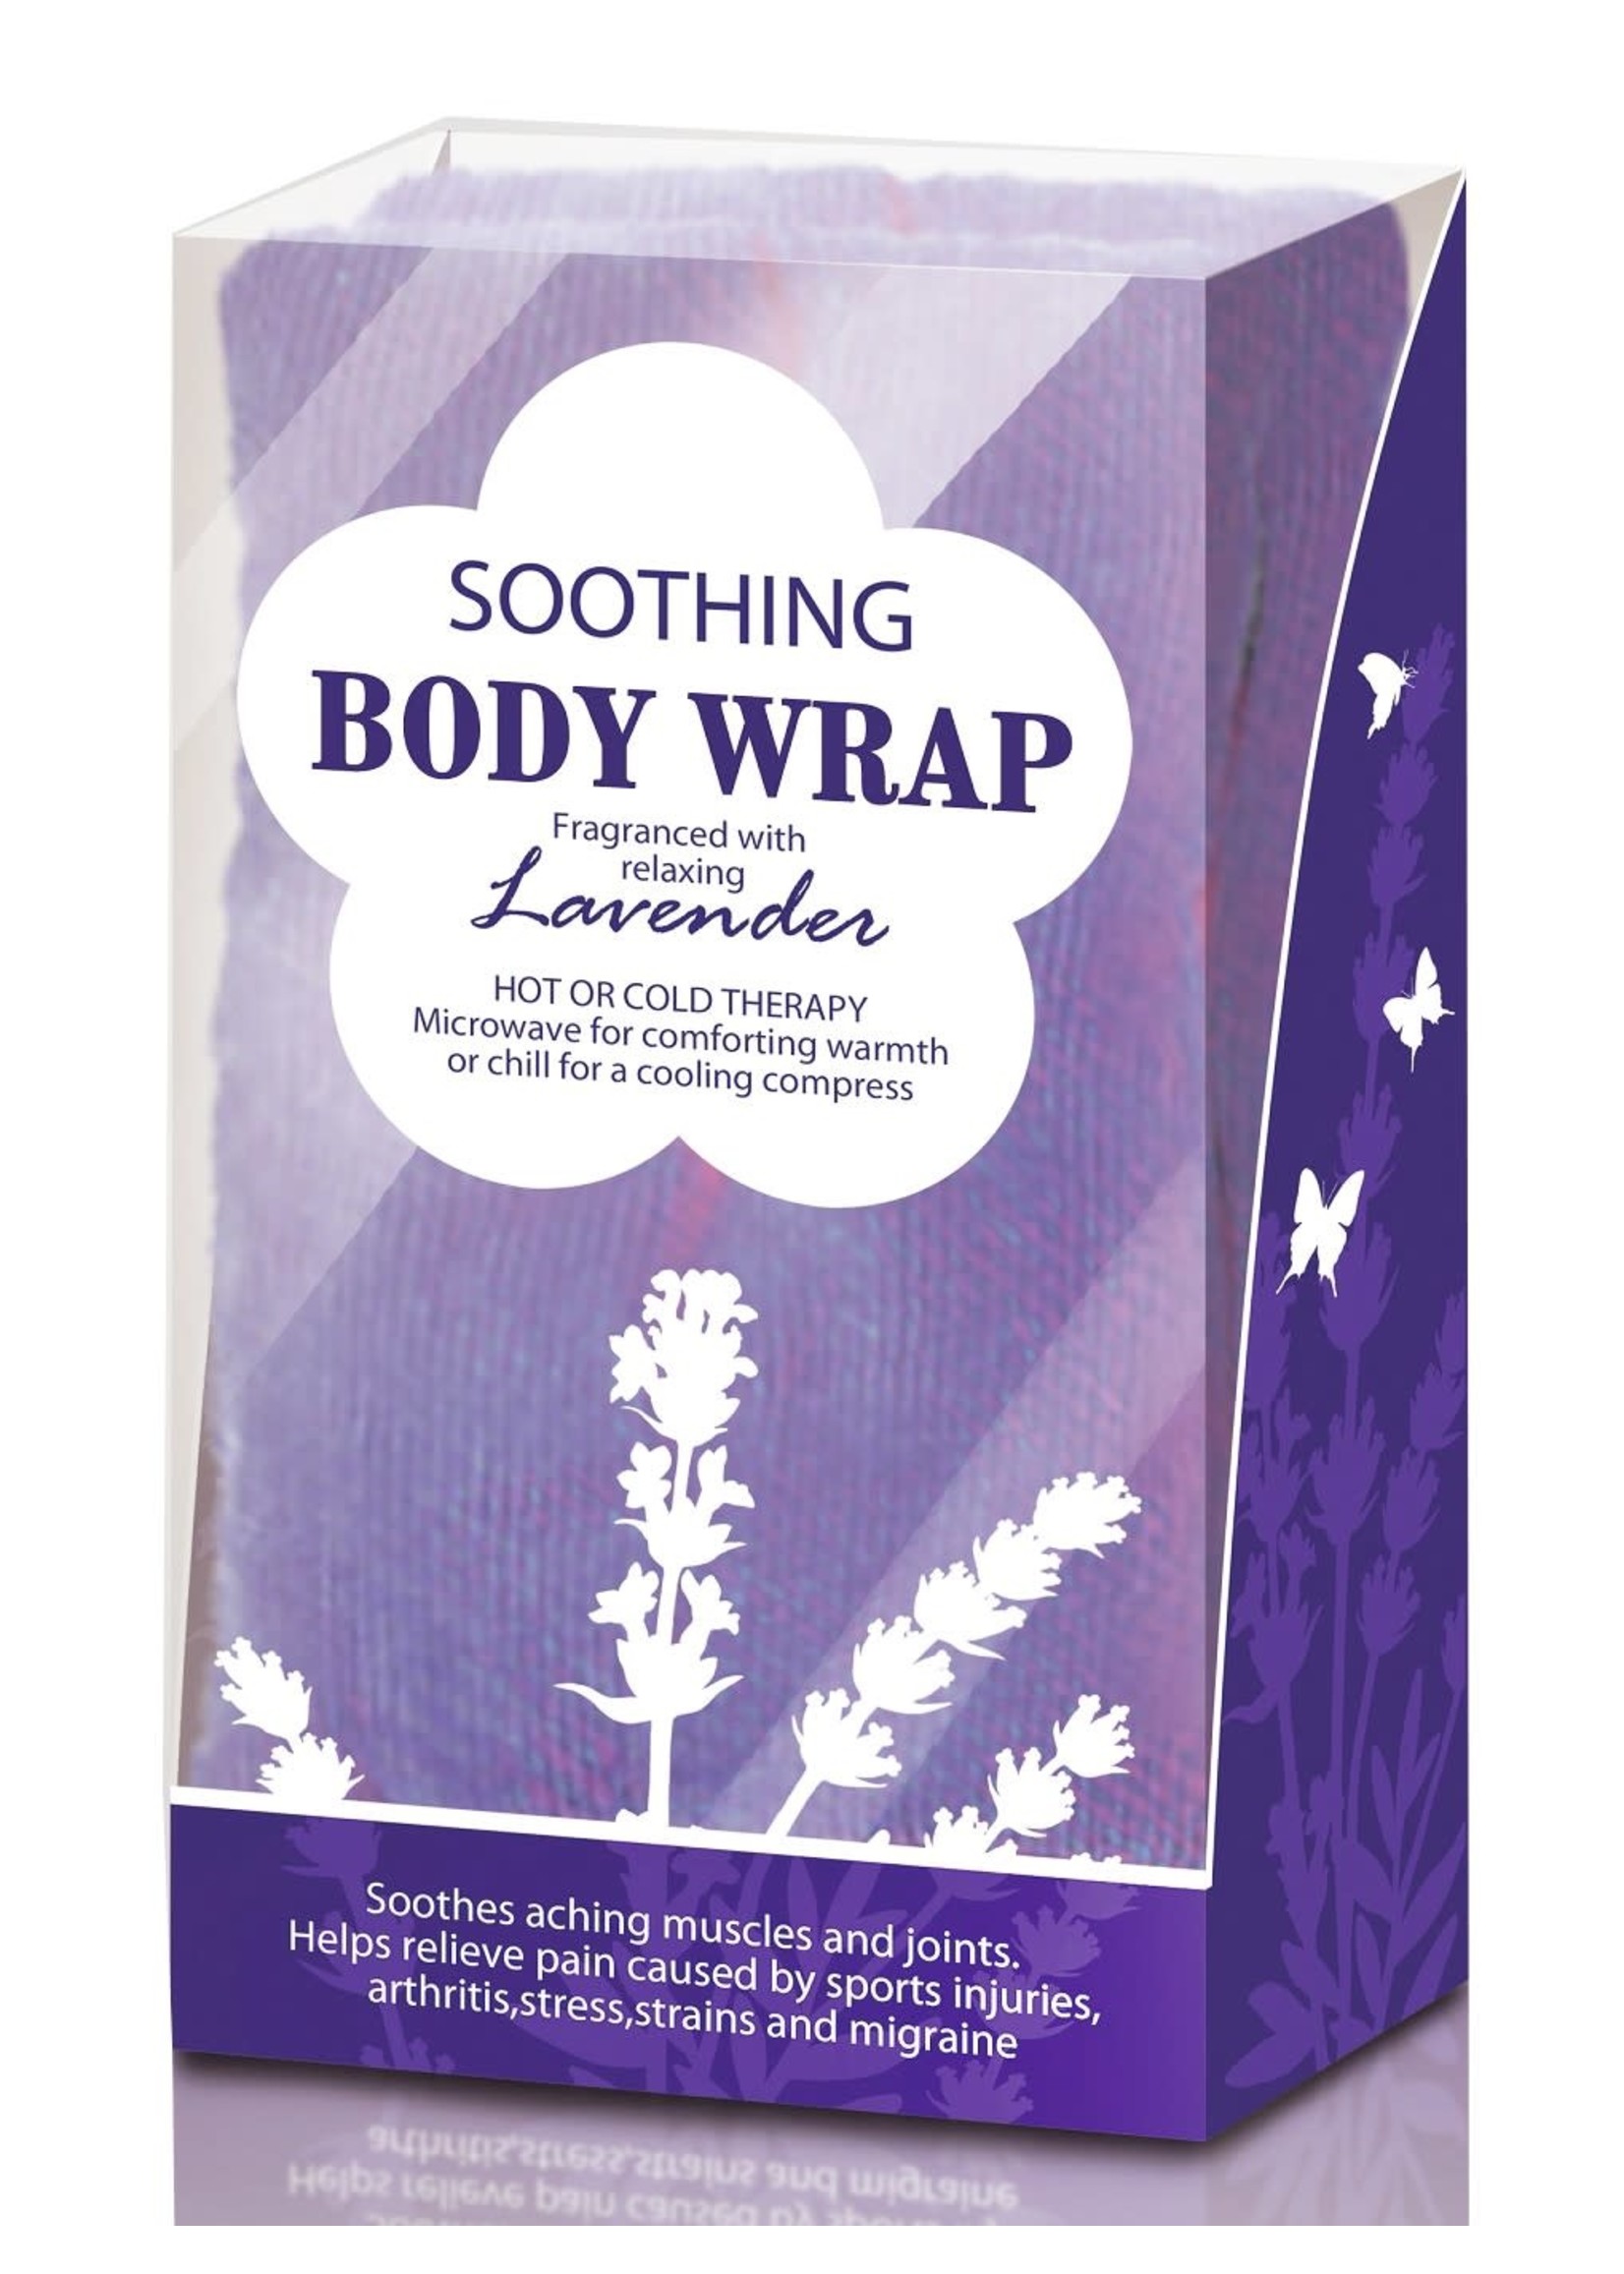 Lavender Scented Body Wrap